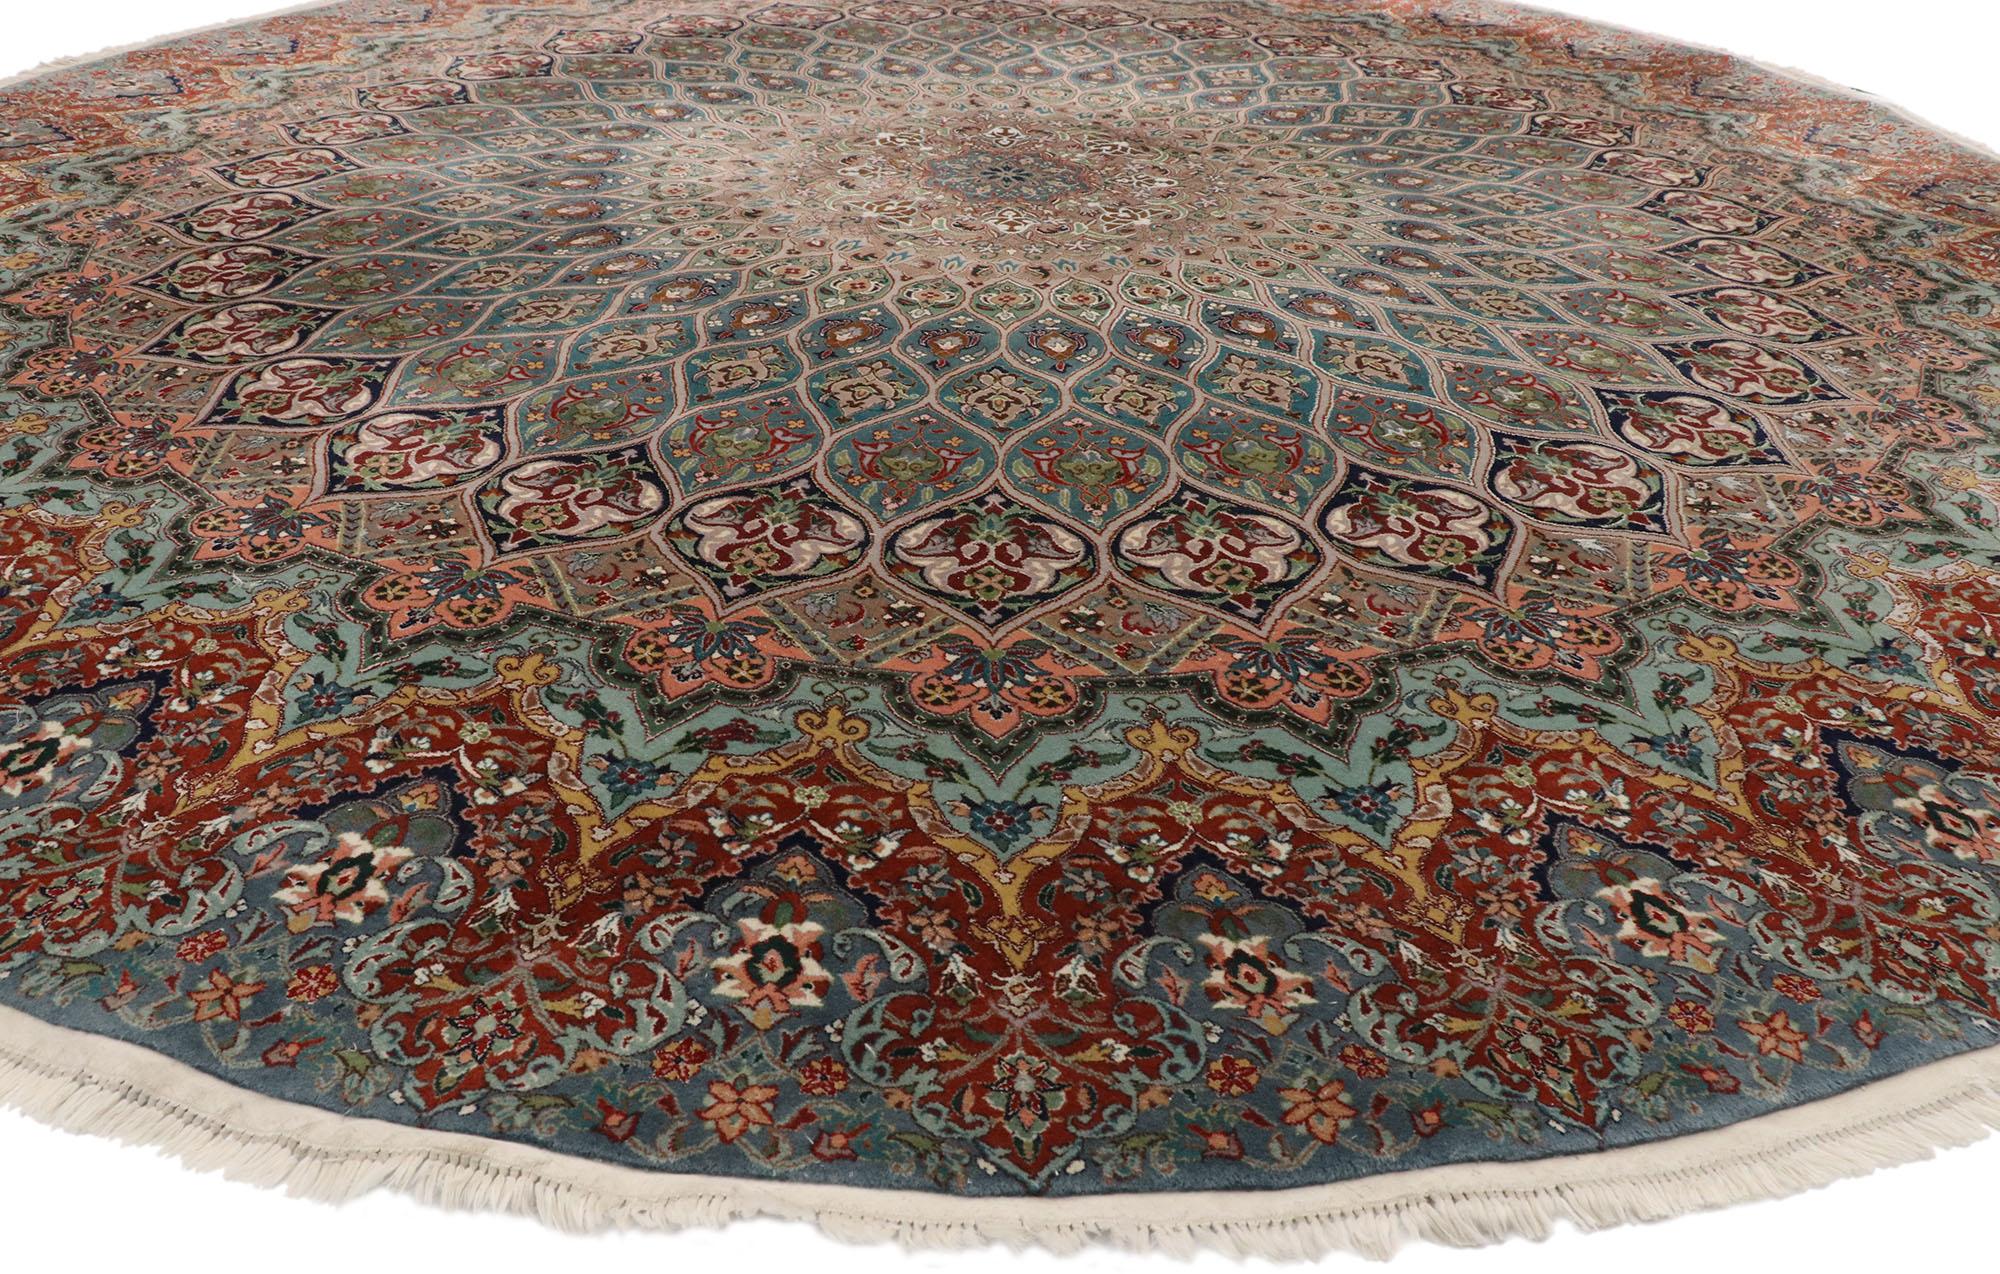 Hand-Knotted Vintage Persian Tabriz Round Mandala Rug with Art Nouveau Rococo Style